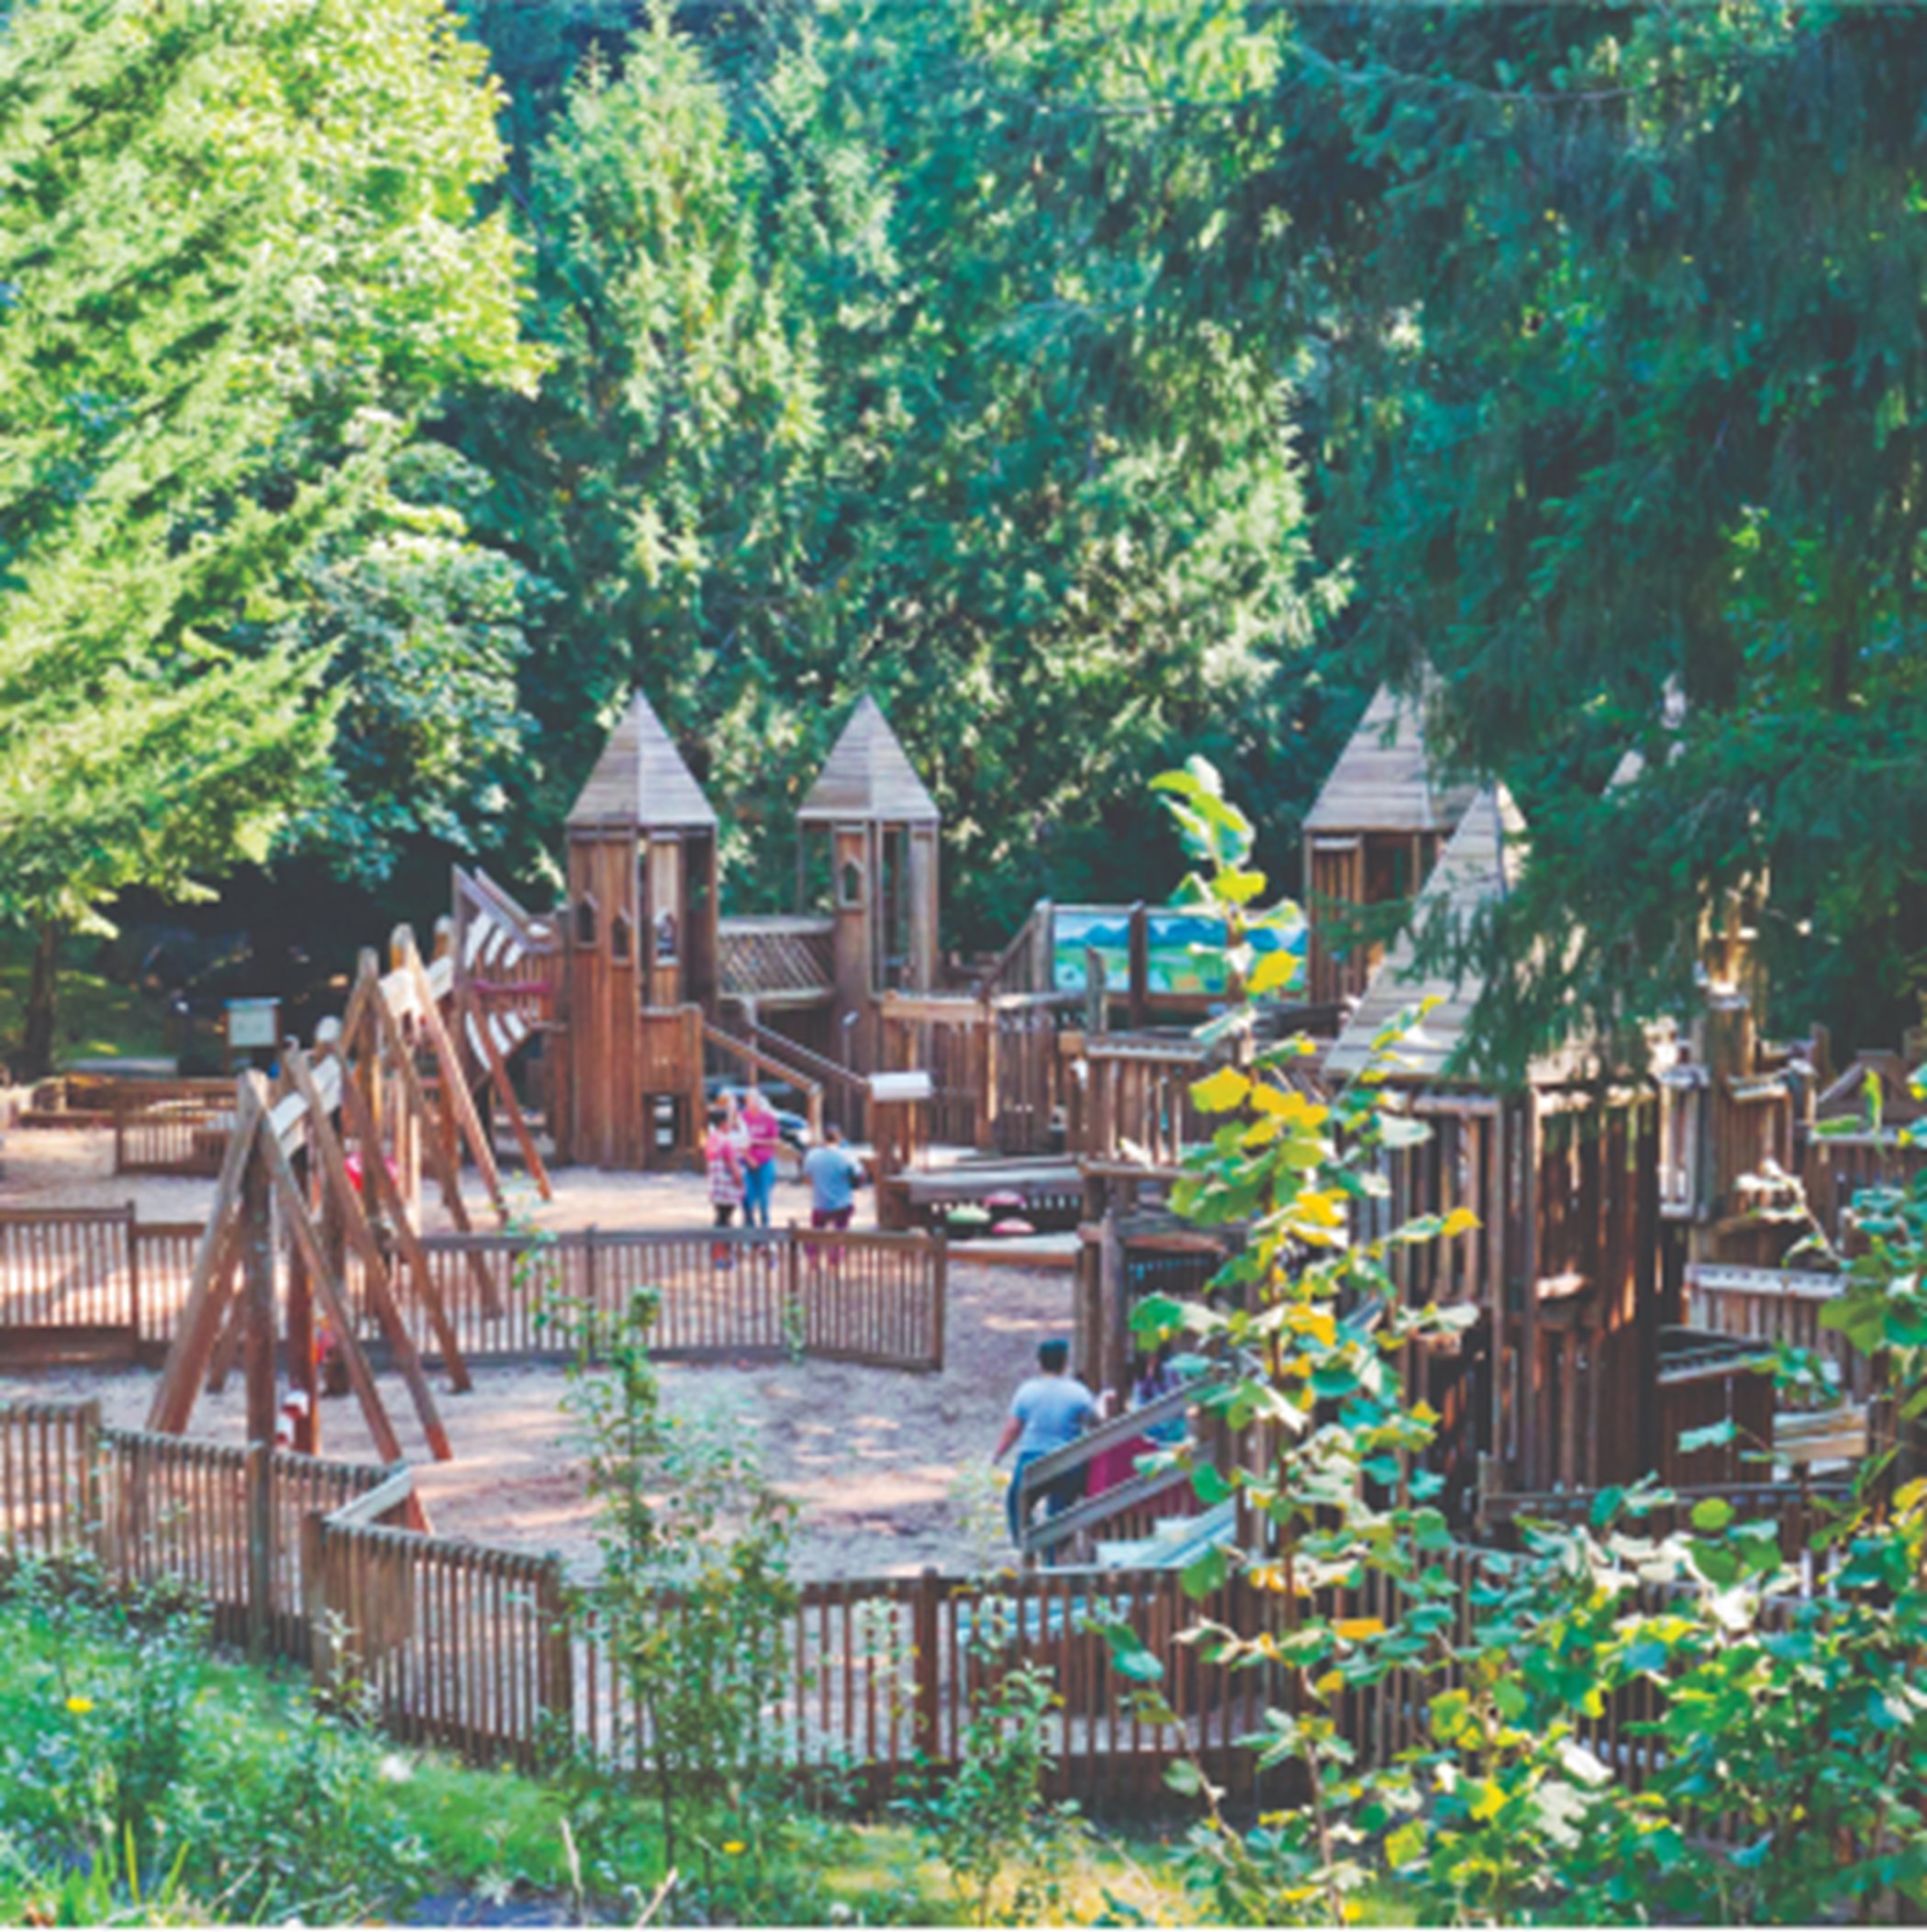 The Fantasy Forest play area